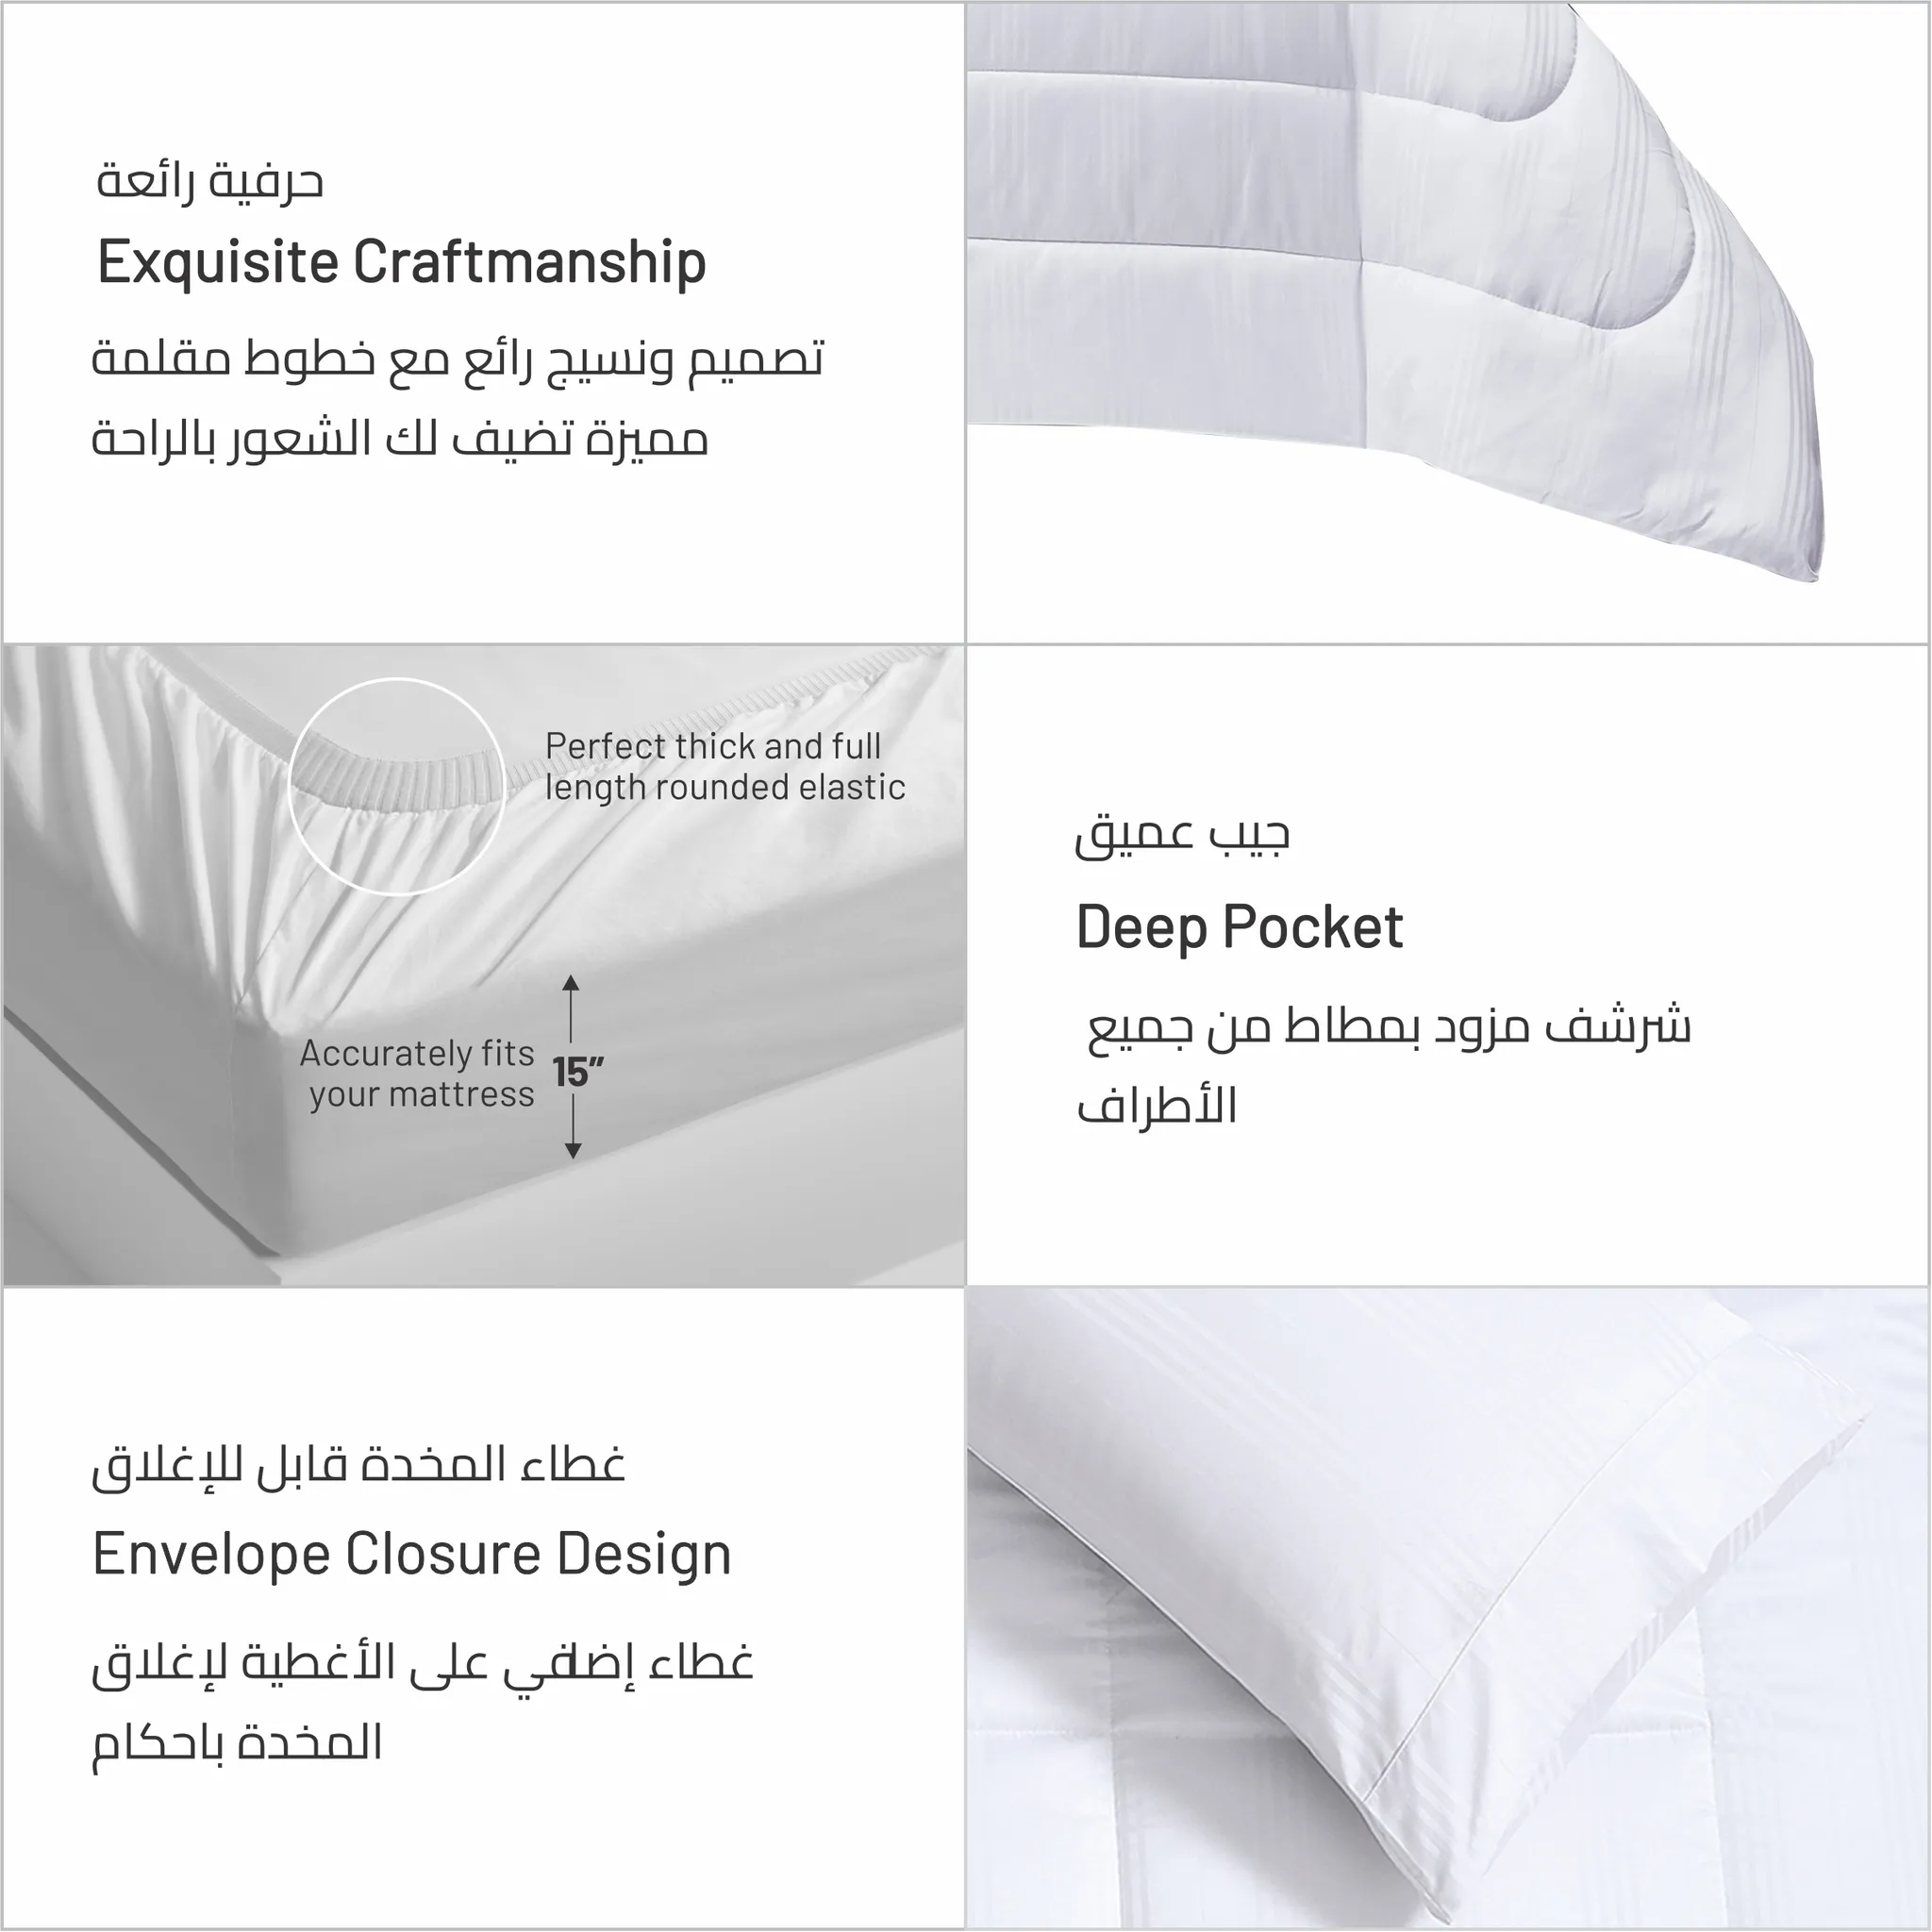 6-Piece Italian Jacquard  Hotel  Comforter  ,Verigated Stripes Quilted ,King 260 x 240 Cms ,White